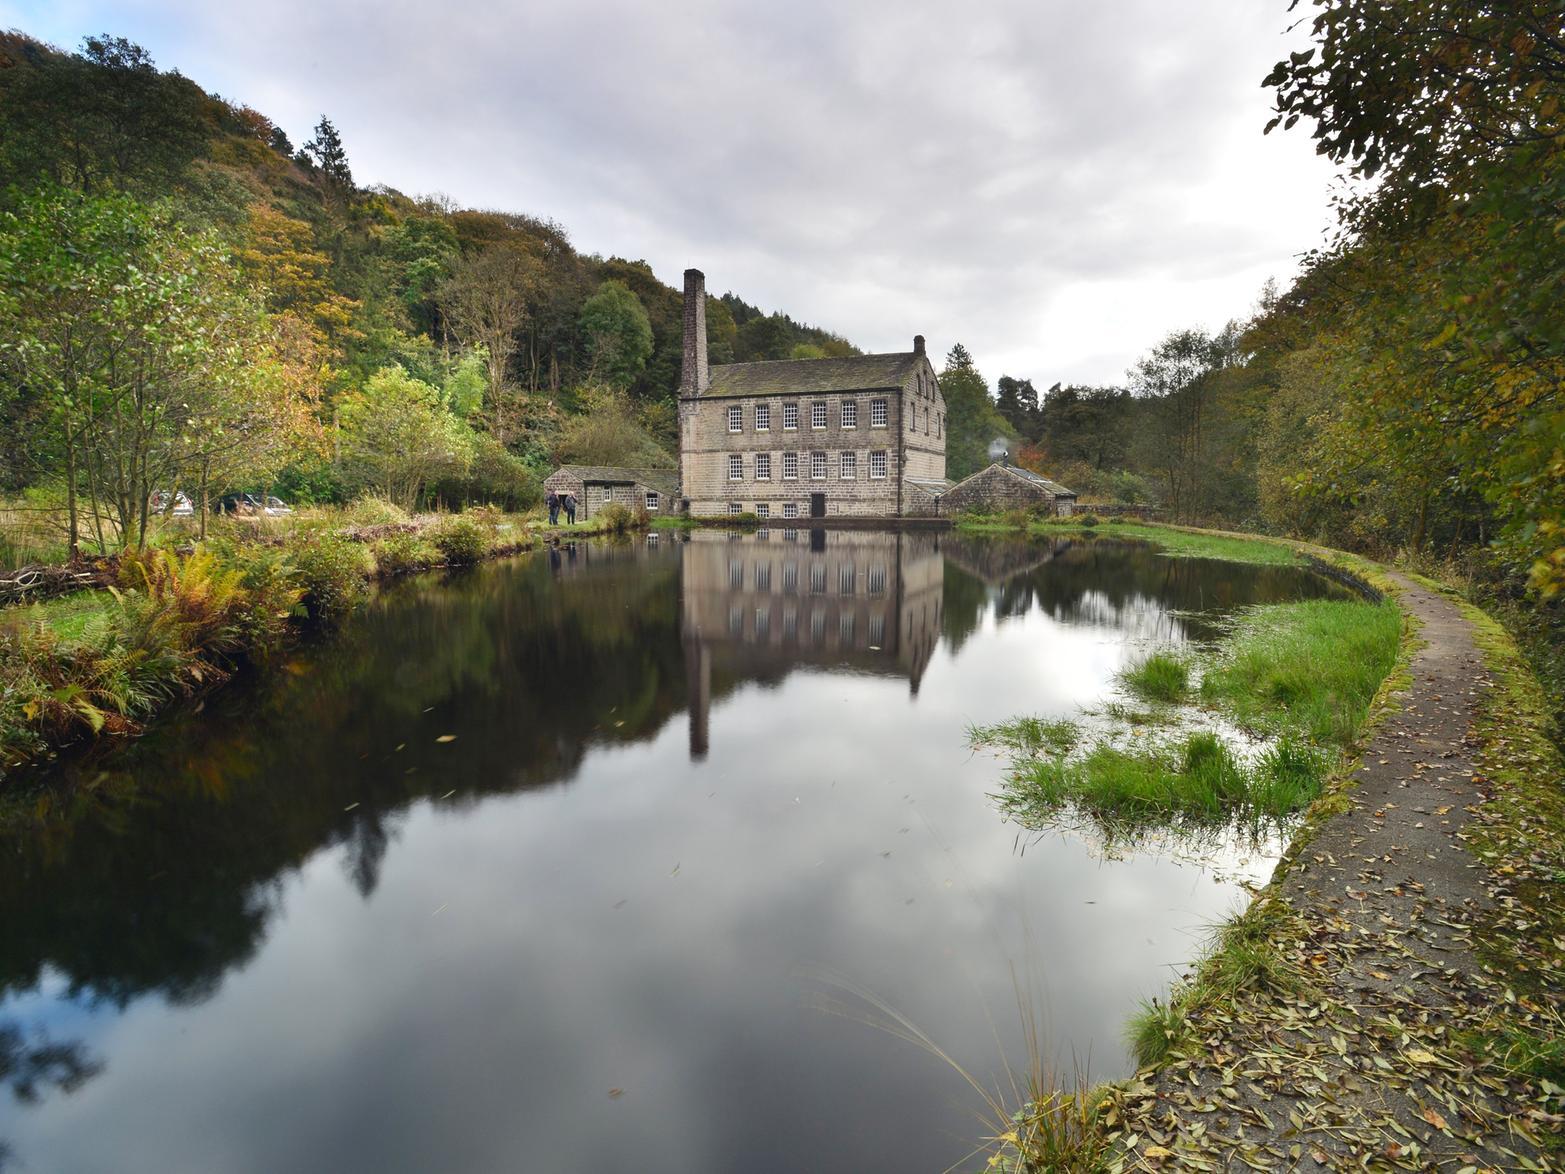 Hardcastle Crags near Hebden Bridge has plenty to entertain the family on a fun day out. From taking a winter walk through the woods to exploring the history in Gibson Mill theres something for everyone.